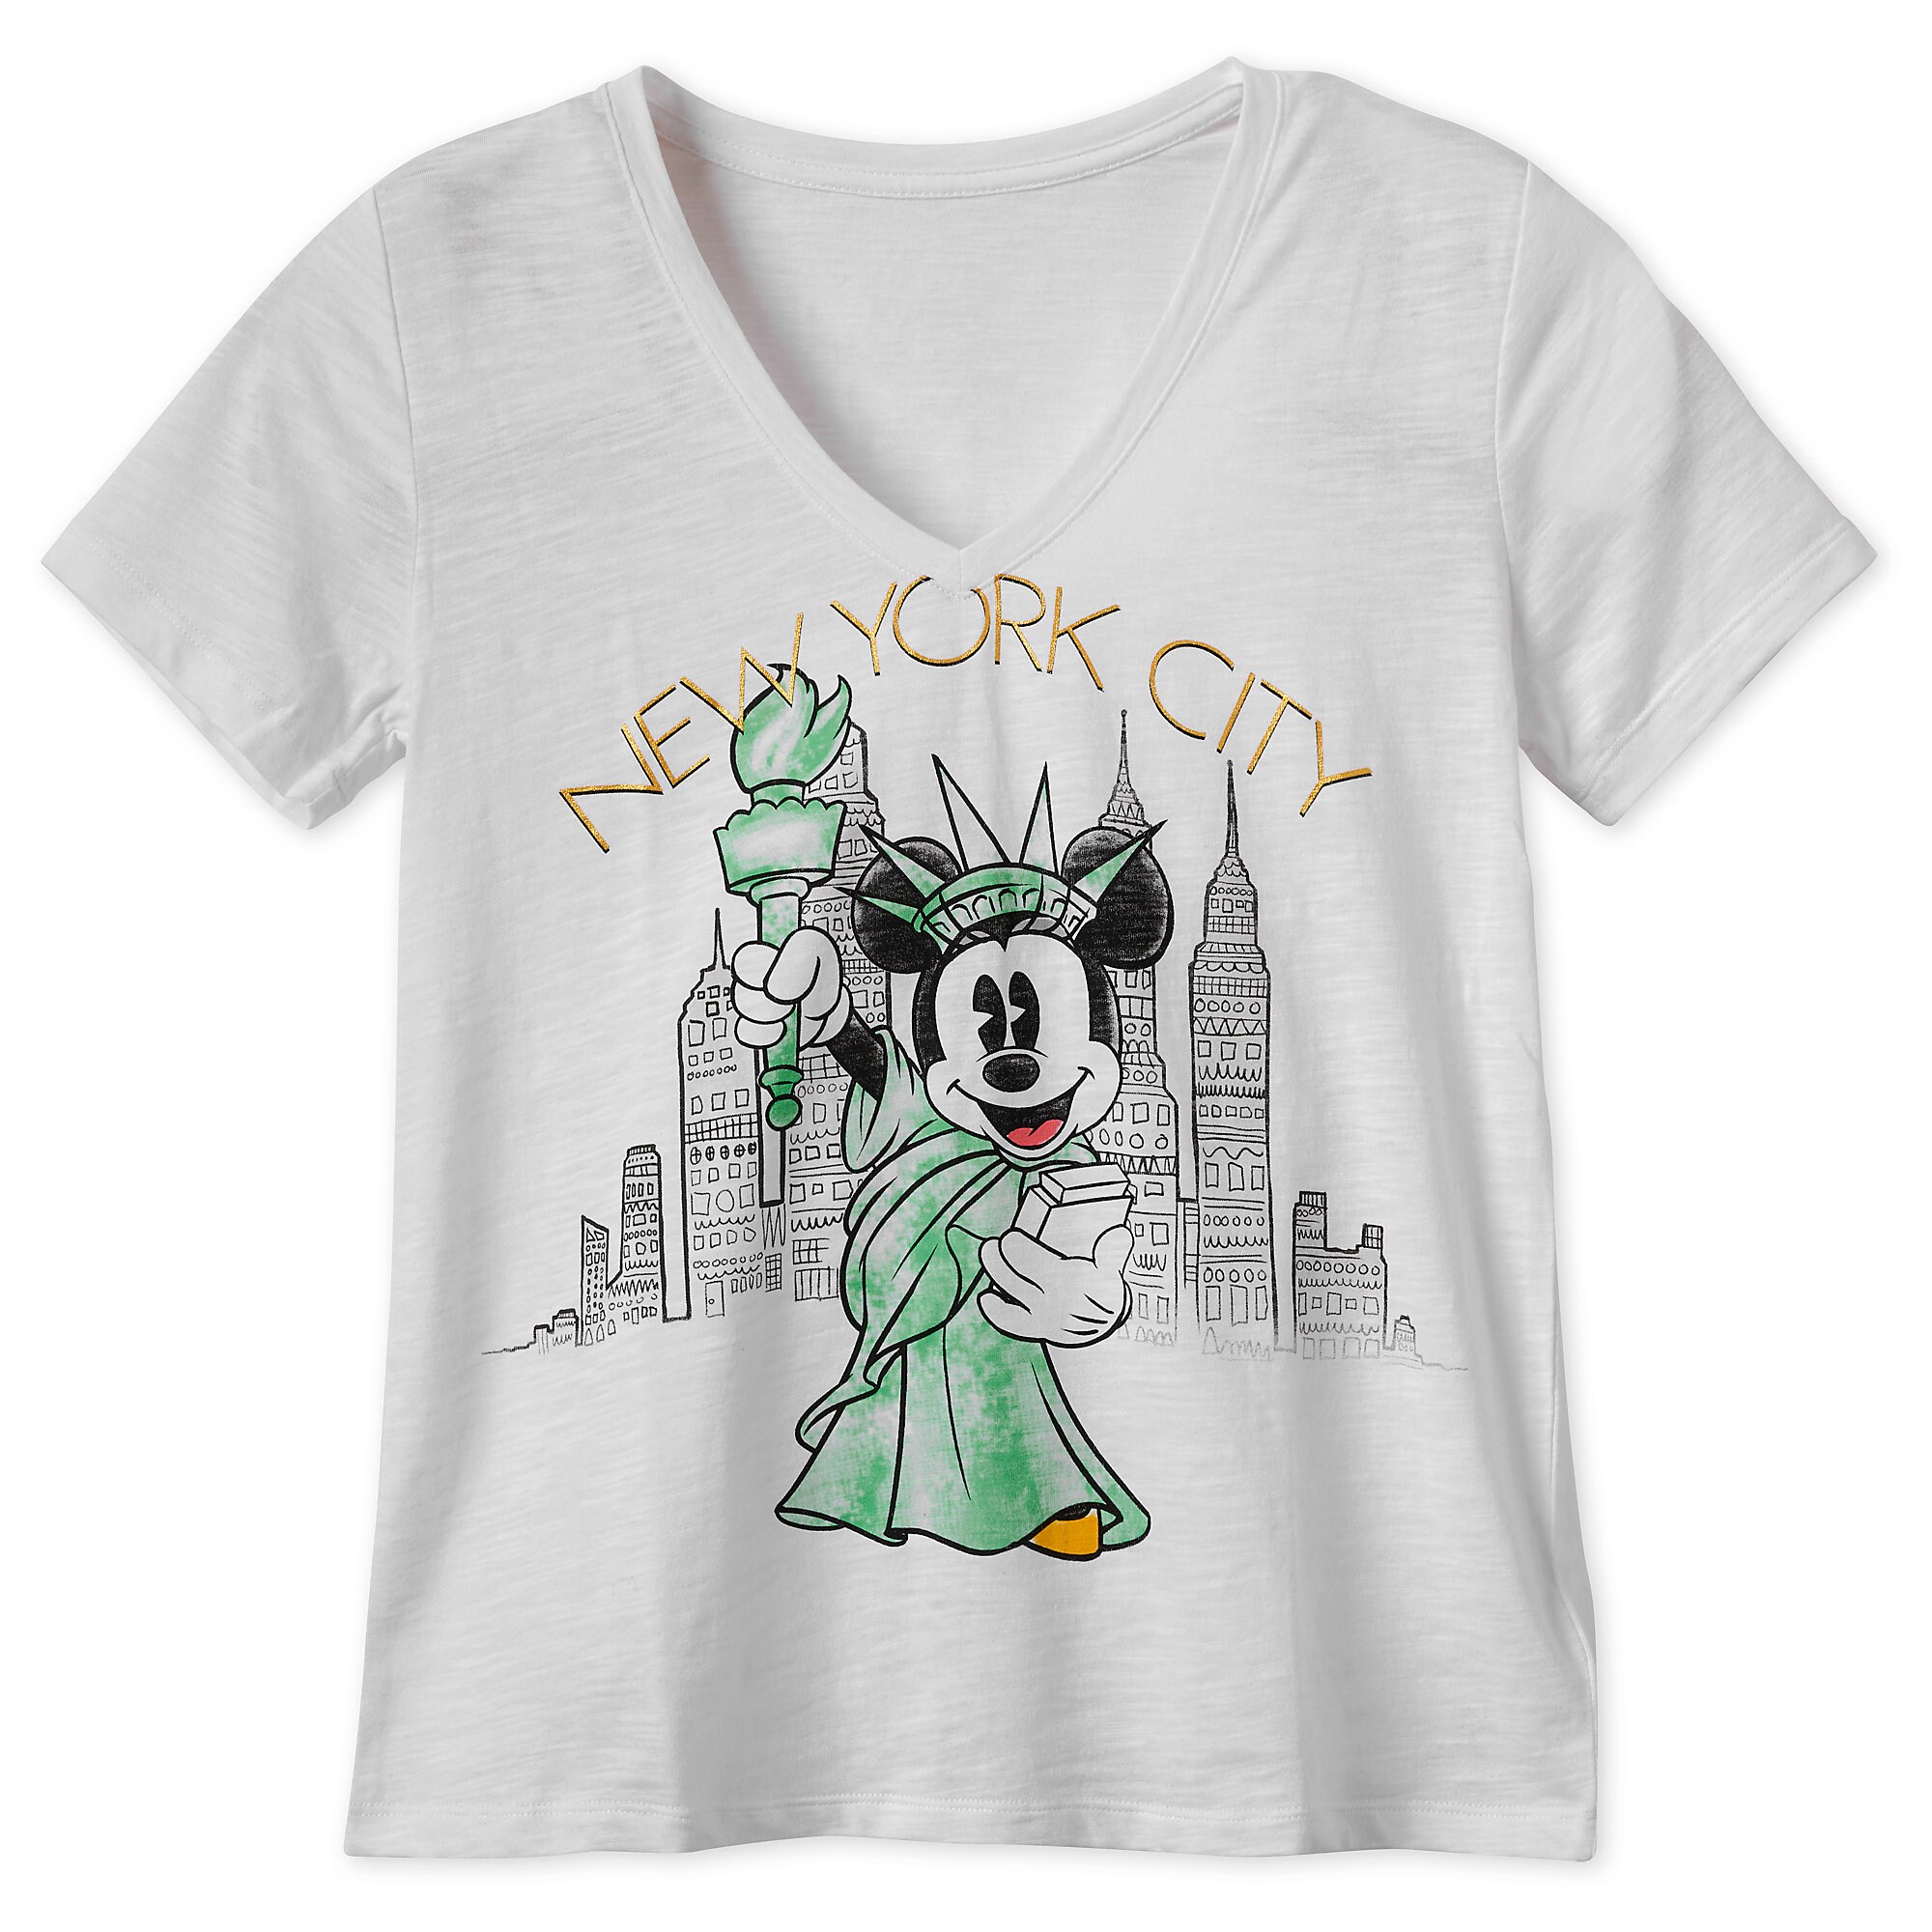 Minnie Mouse Statue of Liberty T-Shirt for Women - New York City